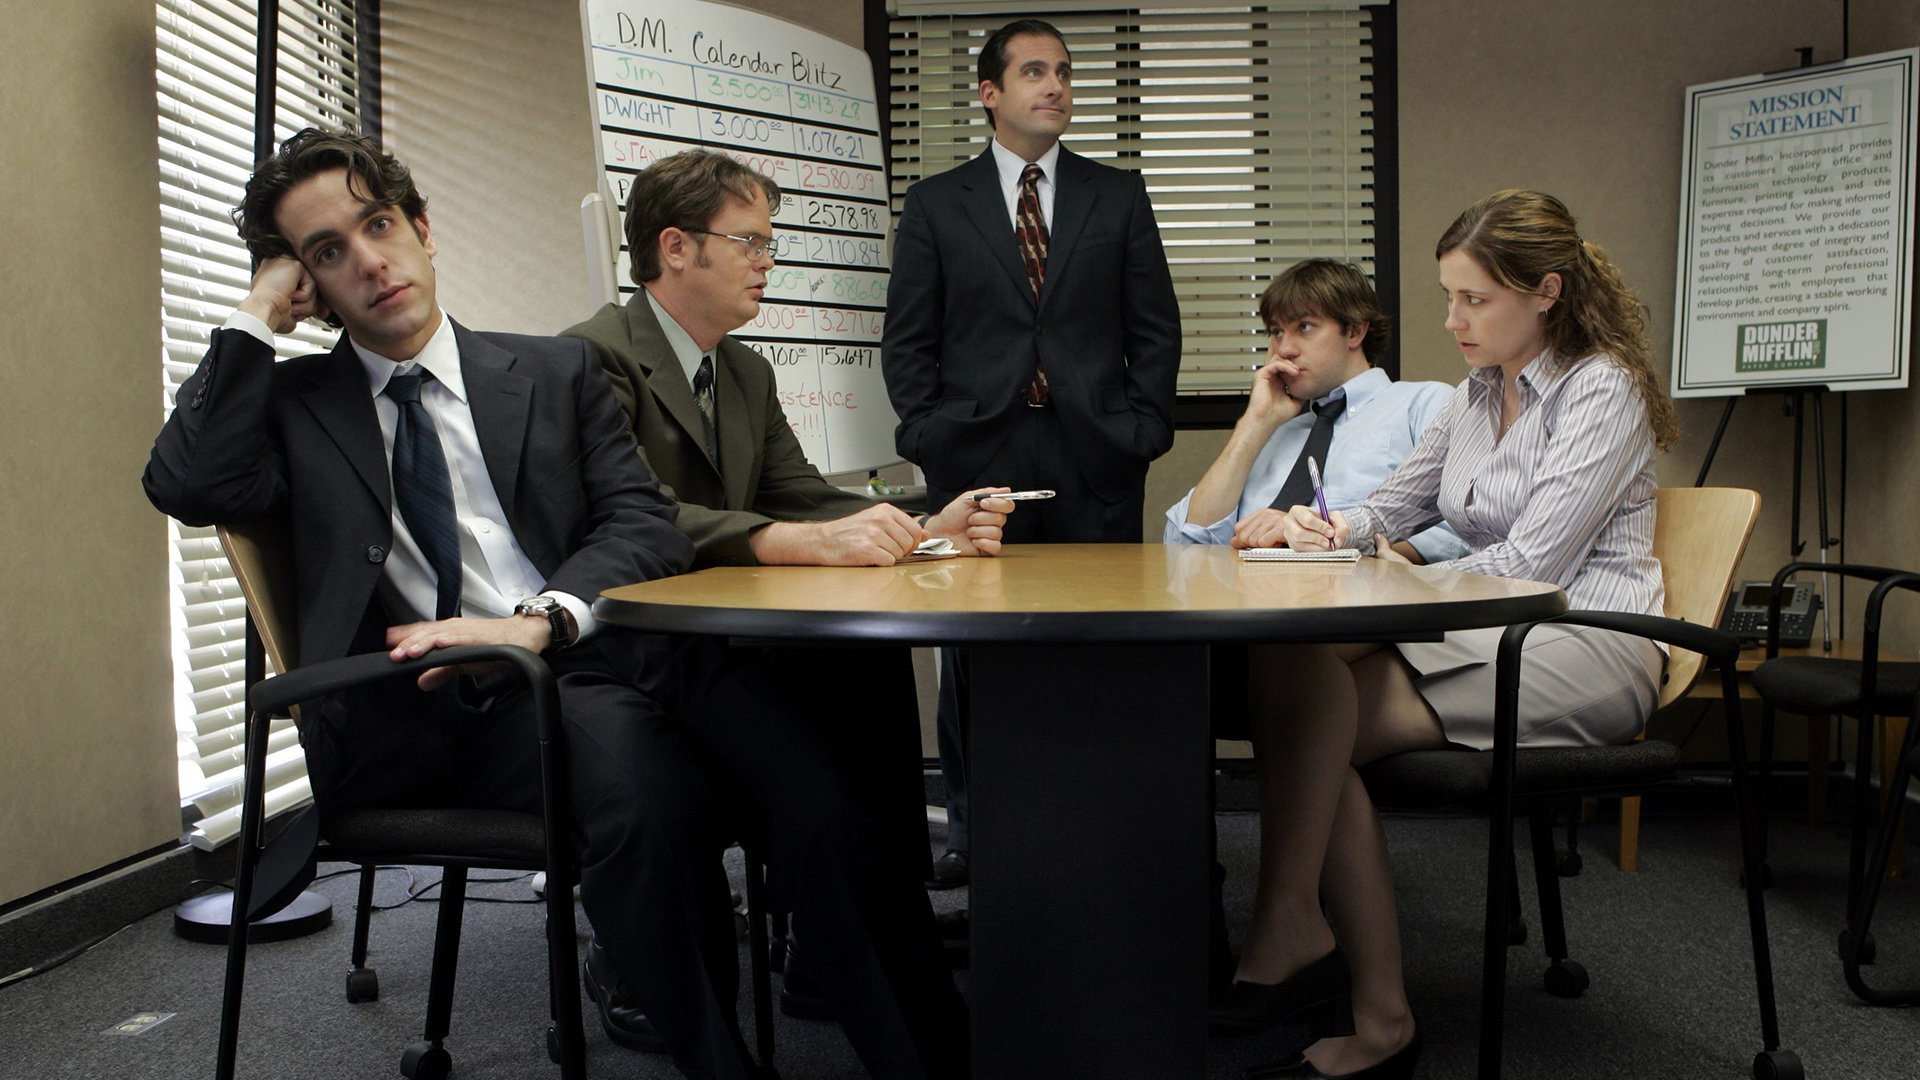 Download full hd 1920x1080 The Office (US) desktop background ID:45995 for free